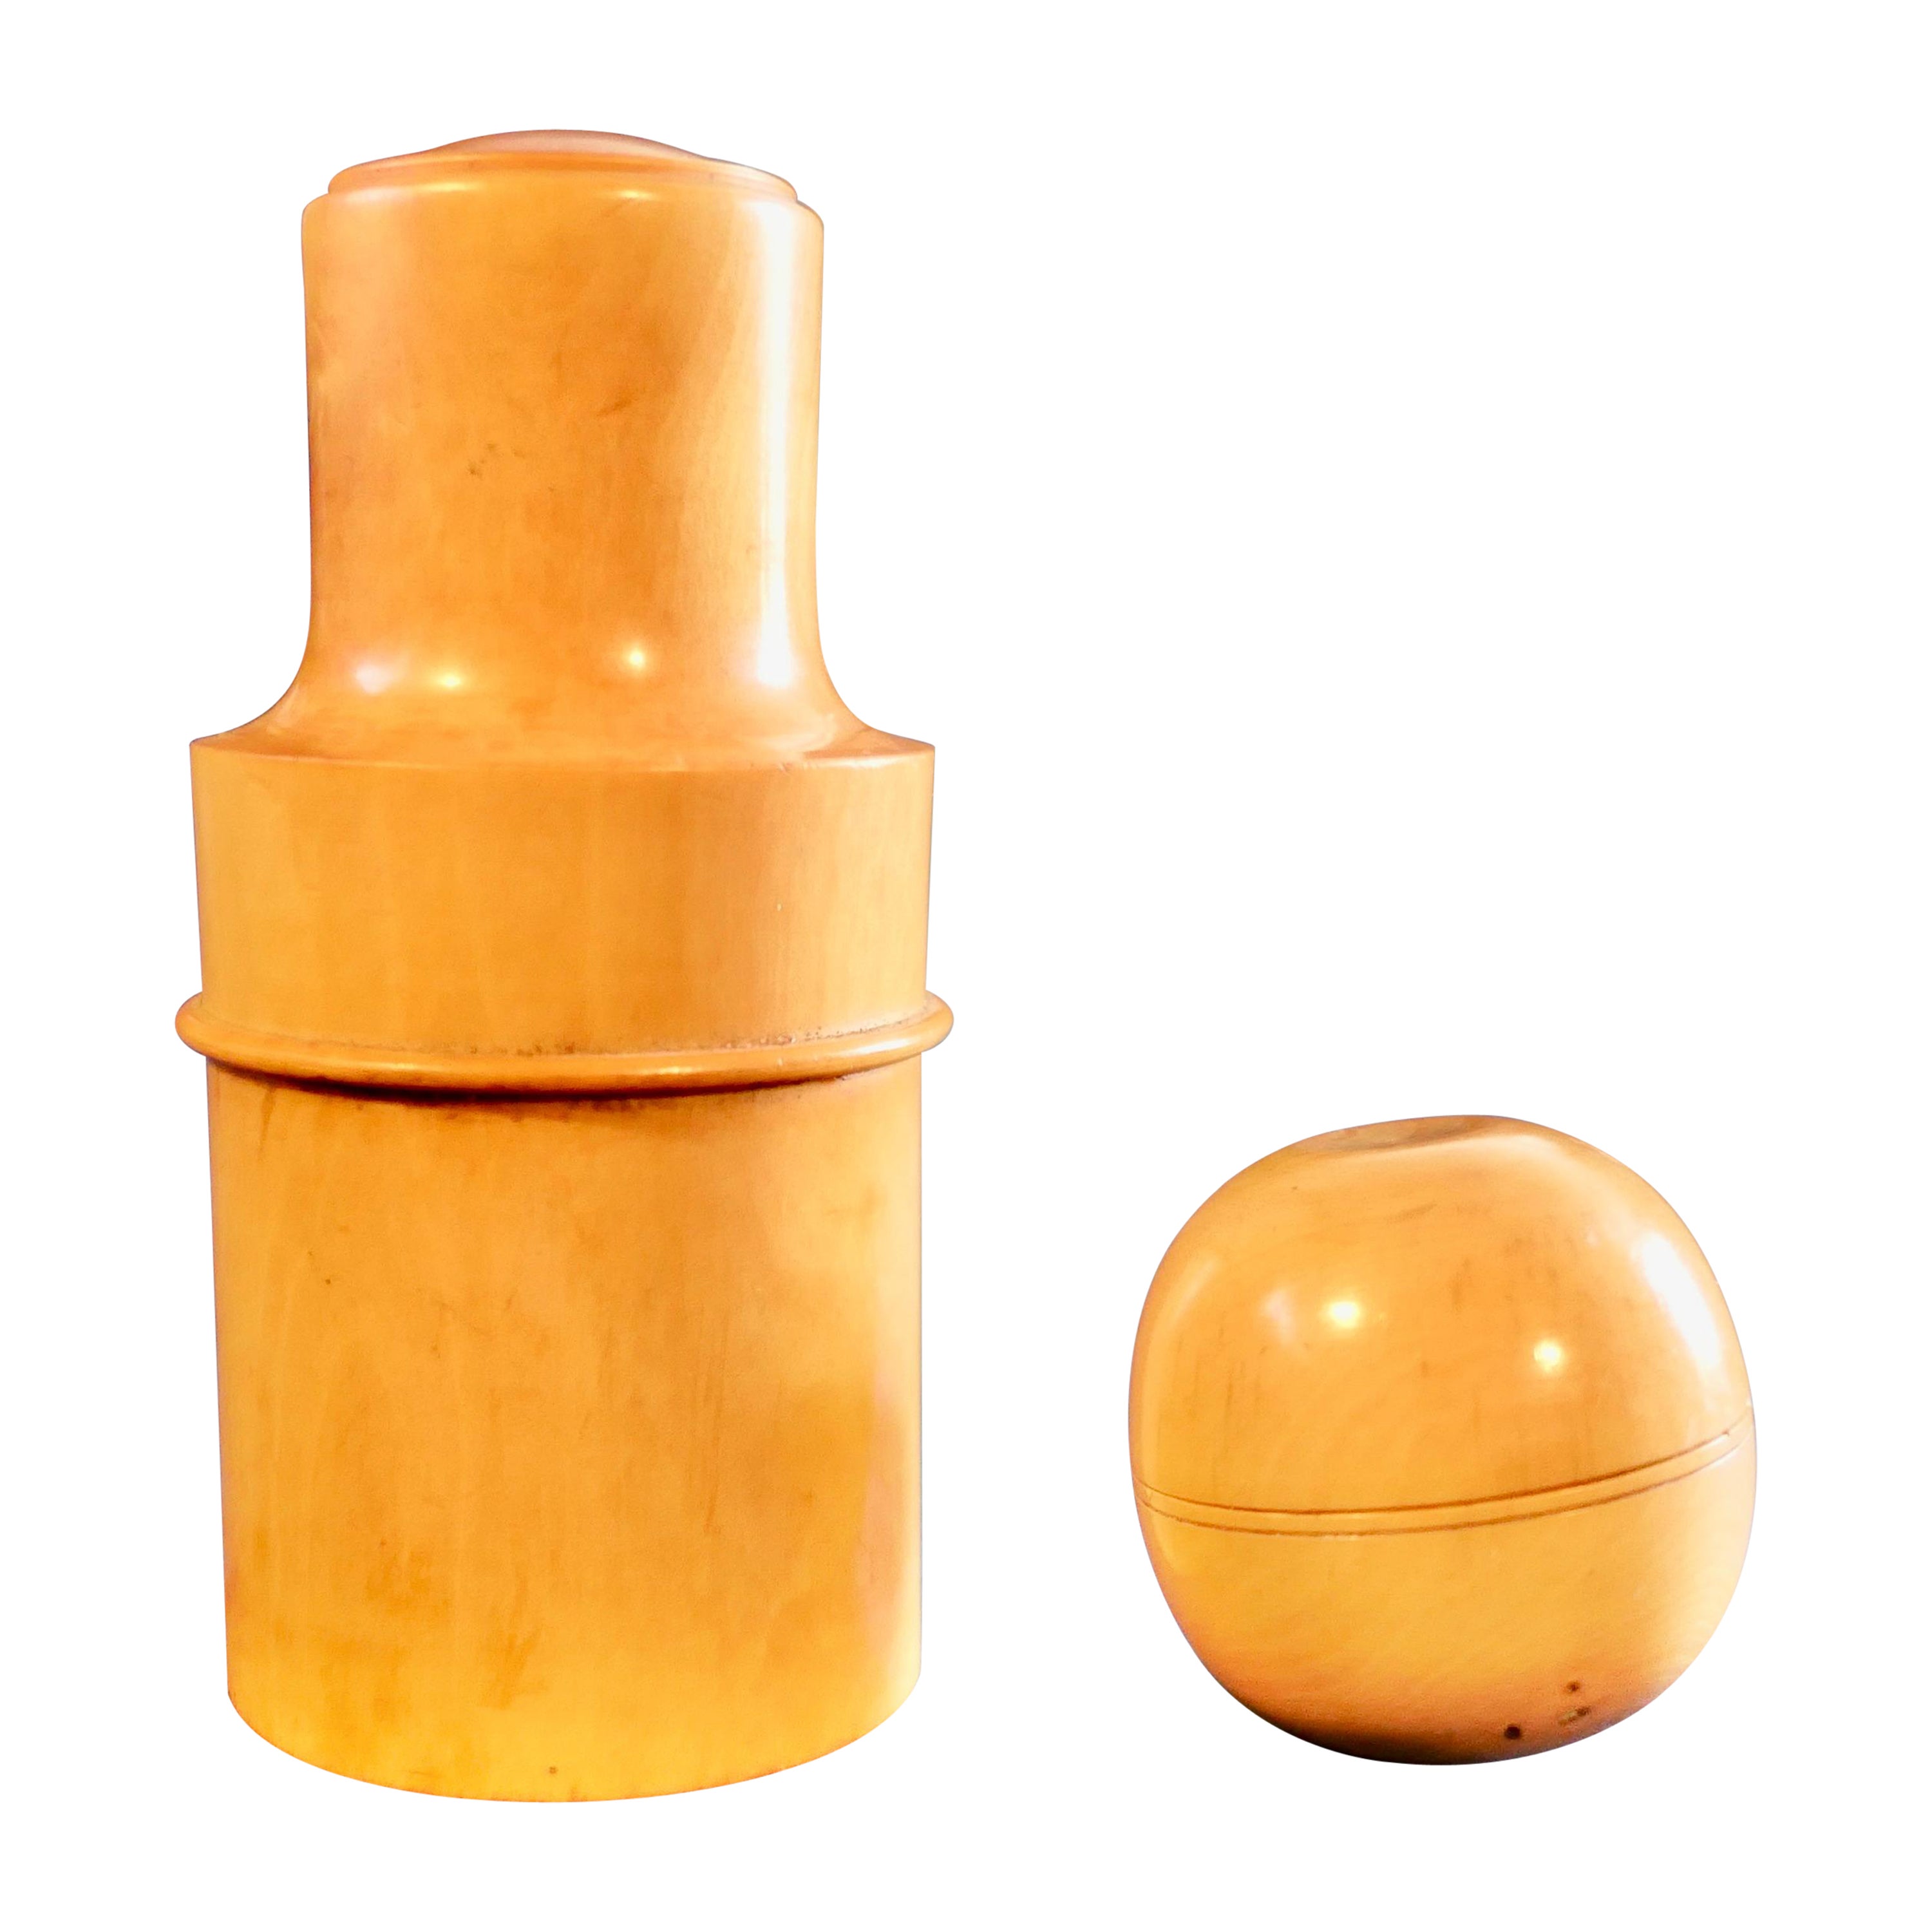 Treen Apothecary’s Bottle and Spherical Thimble Box in Sycamore   Made in the 19 For Sale